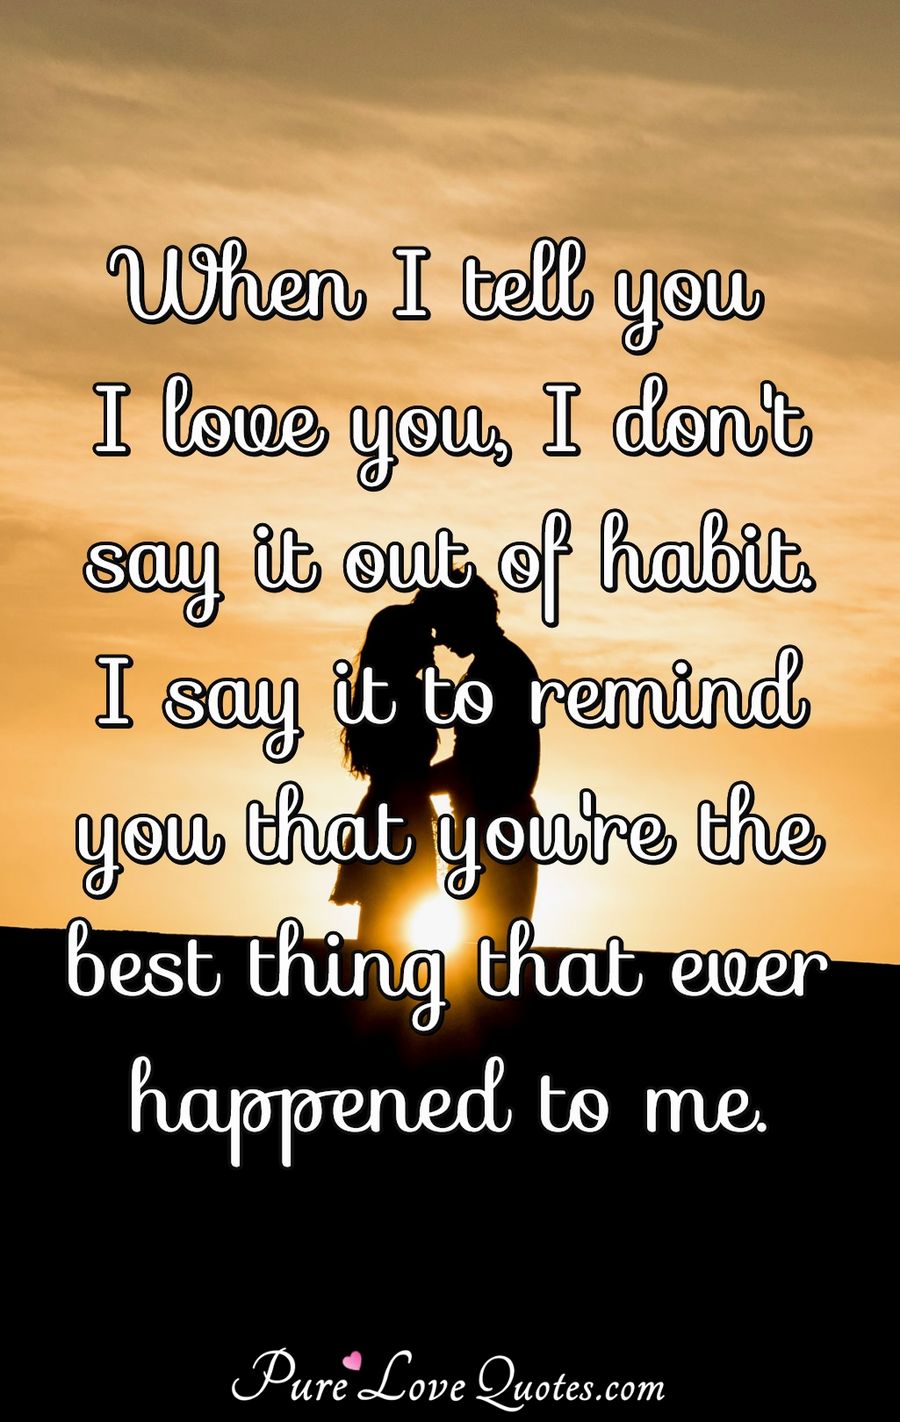 When I tell you I love you, I don't say it out of habit. I say it to remind you that you're the best thing that ever happened to me. - Anonymous